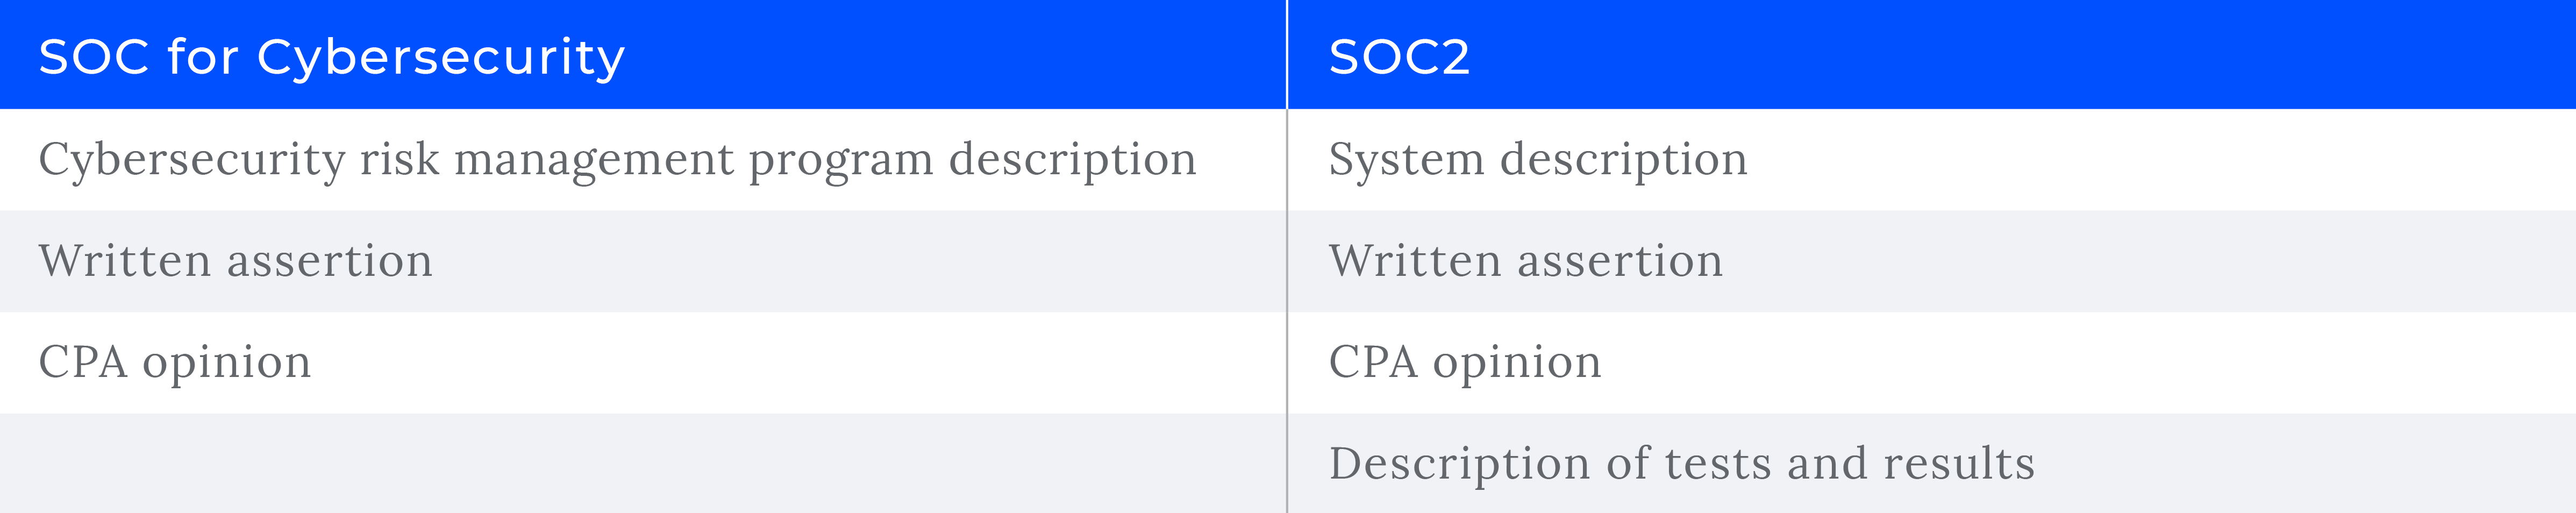 SOC for Cybersecurity vs. SOC 2: 5 key differences 